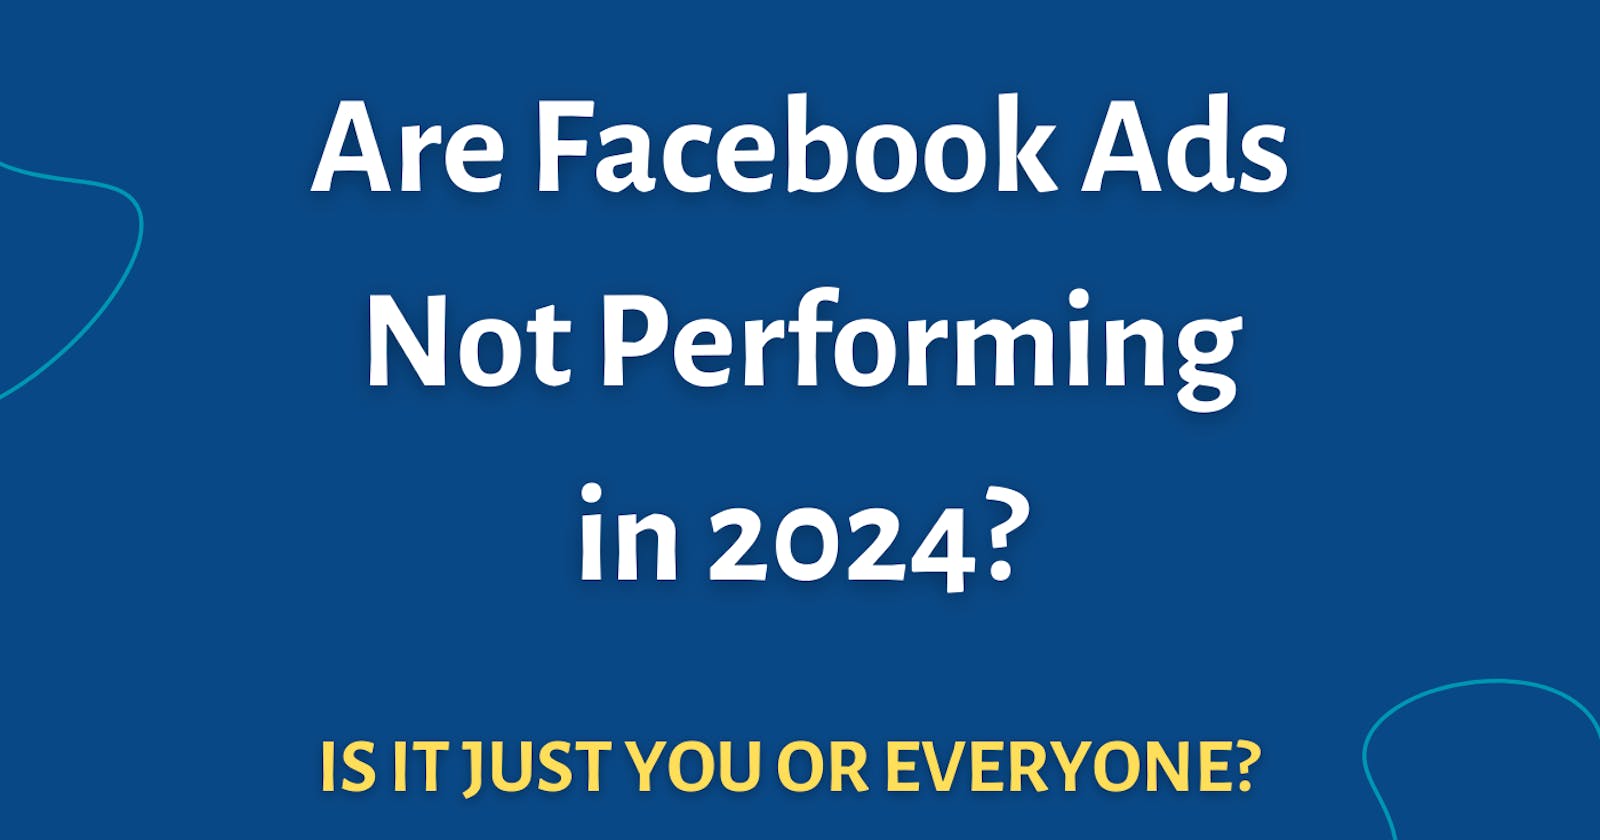 Are Facebook Ads Not Performing in 2024?